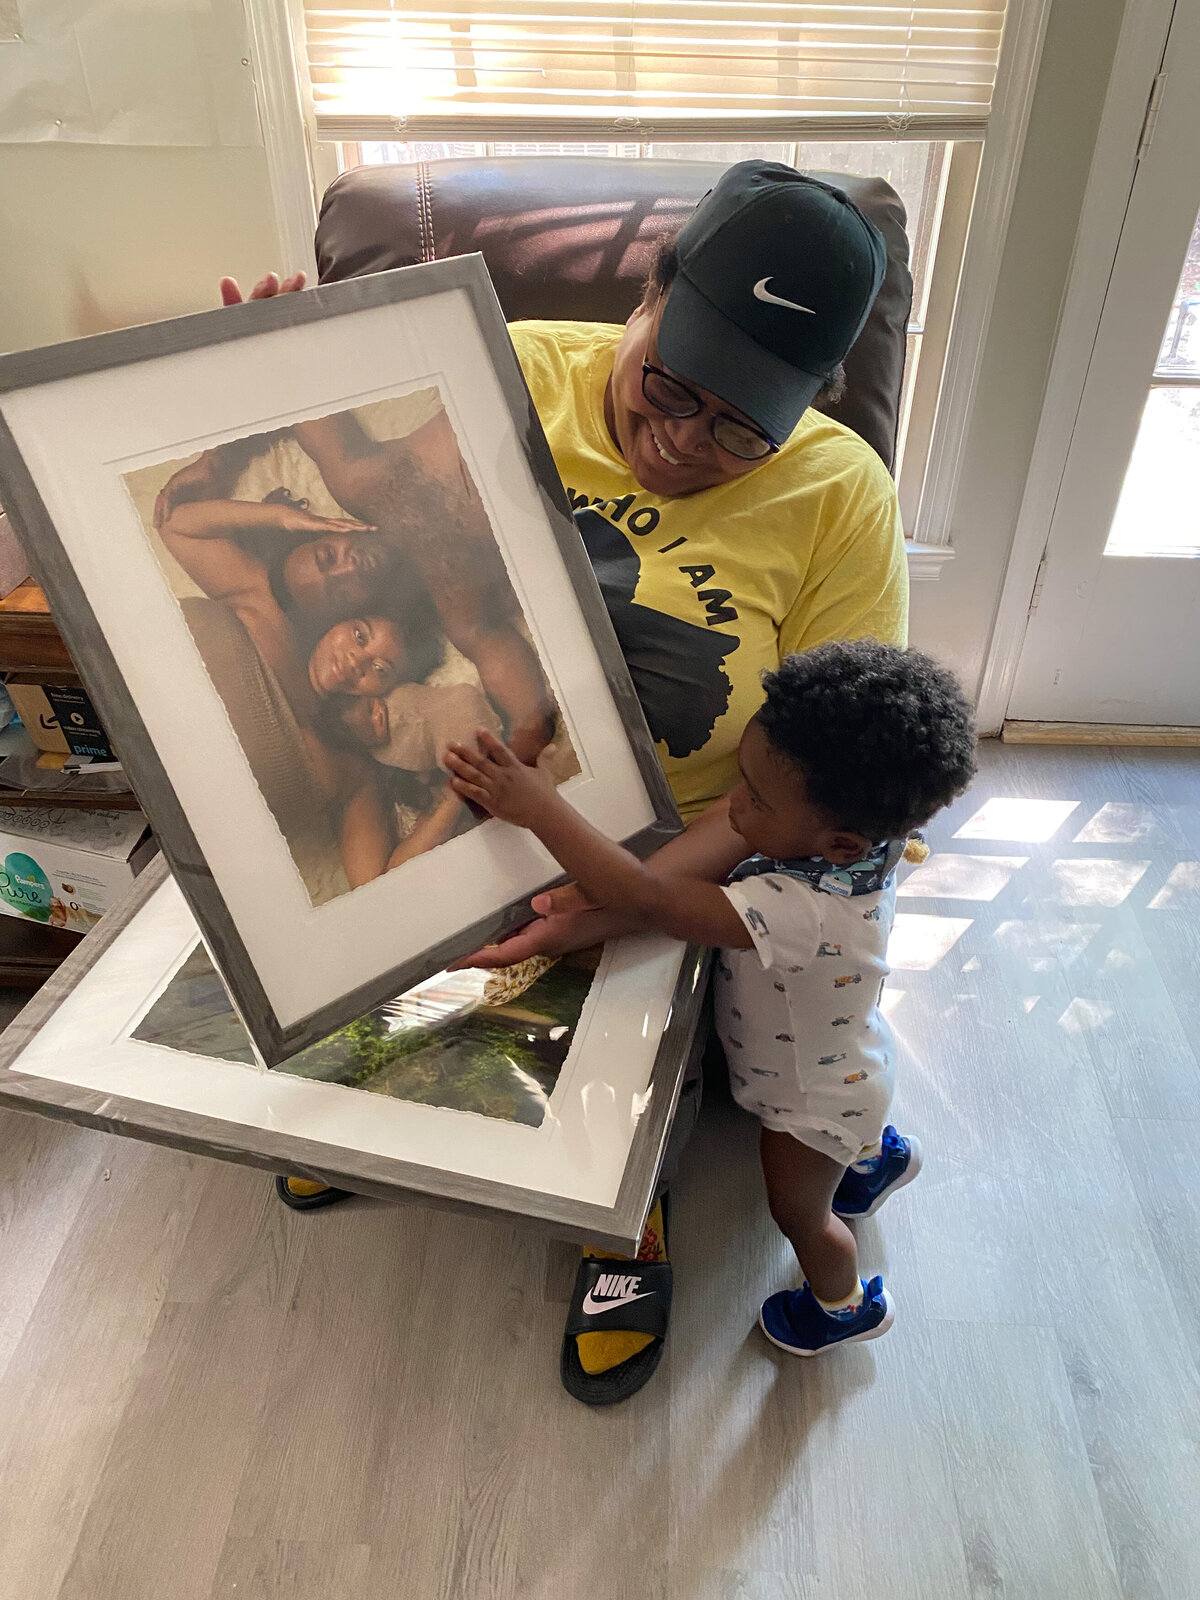 Charlotte mom celebrates baby's arrival, opening framed newborn photos with her excited toddler, who proudly holds his baby picture.